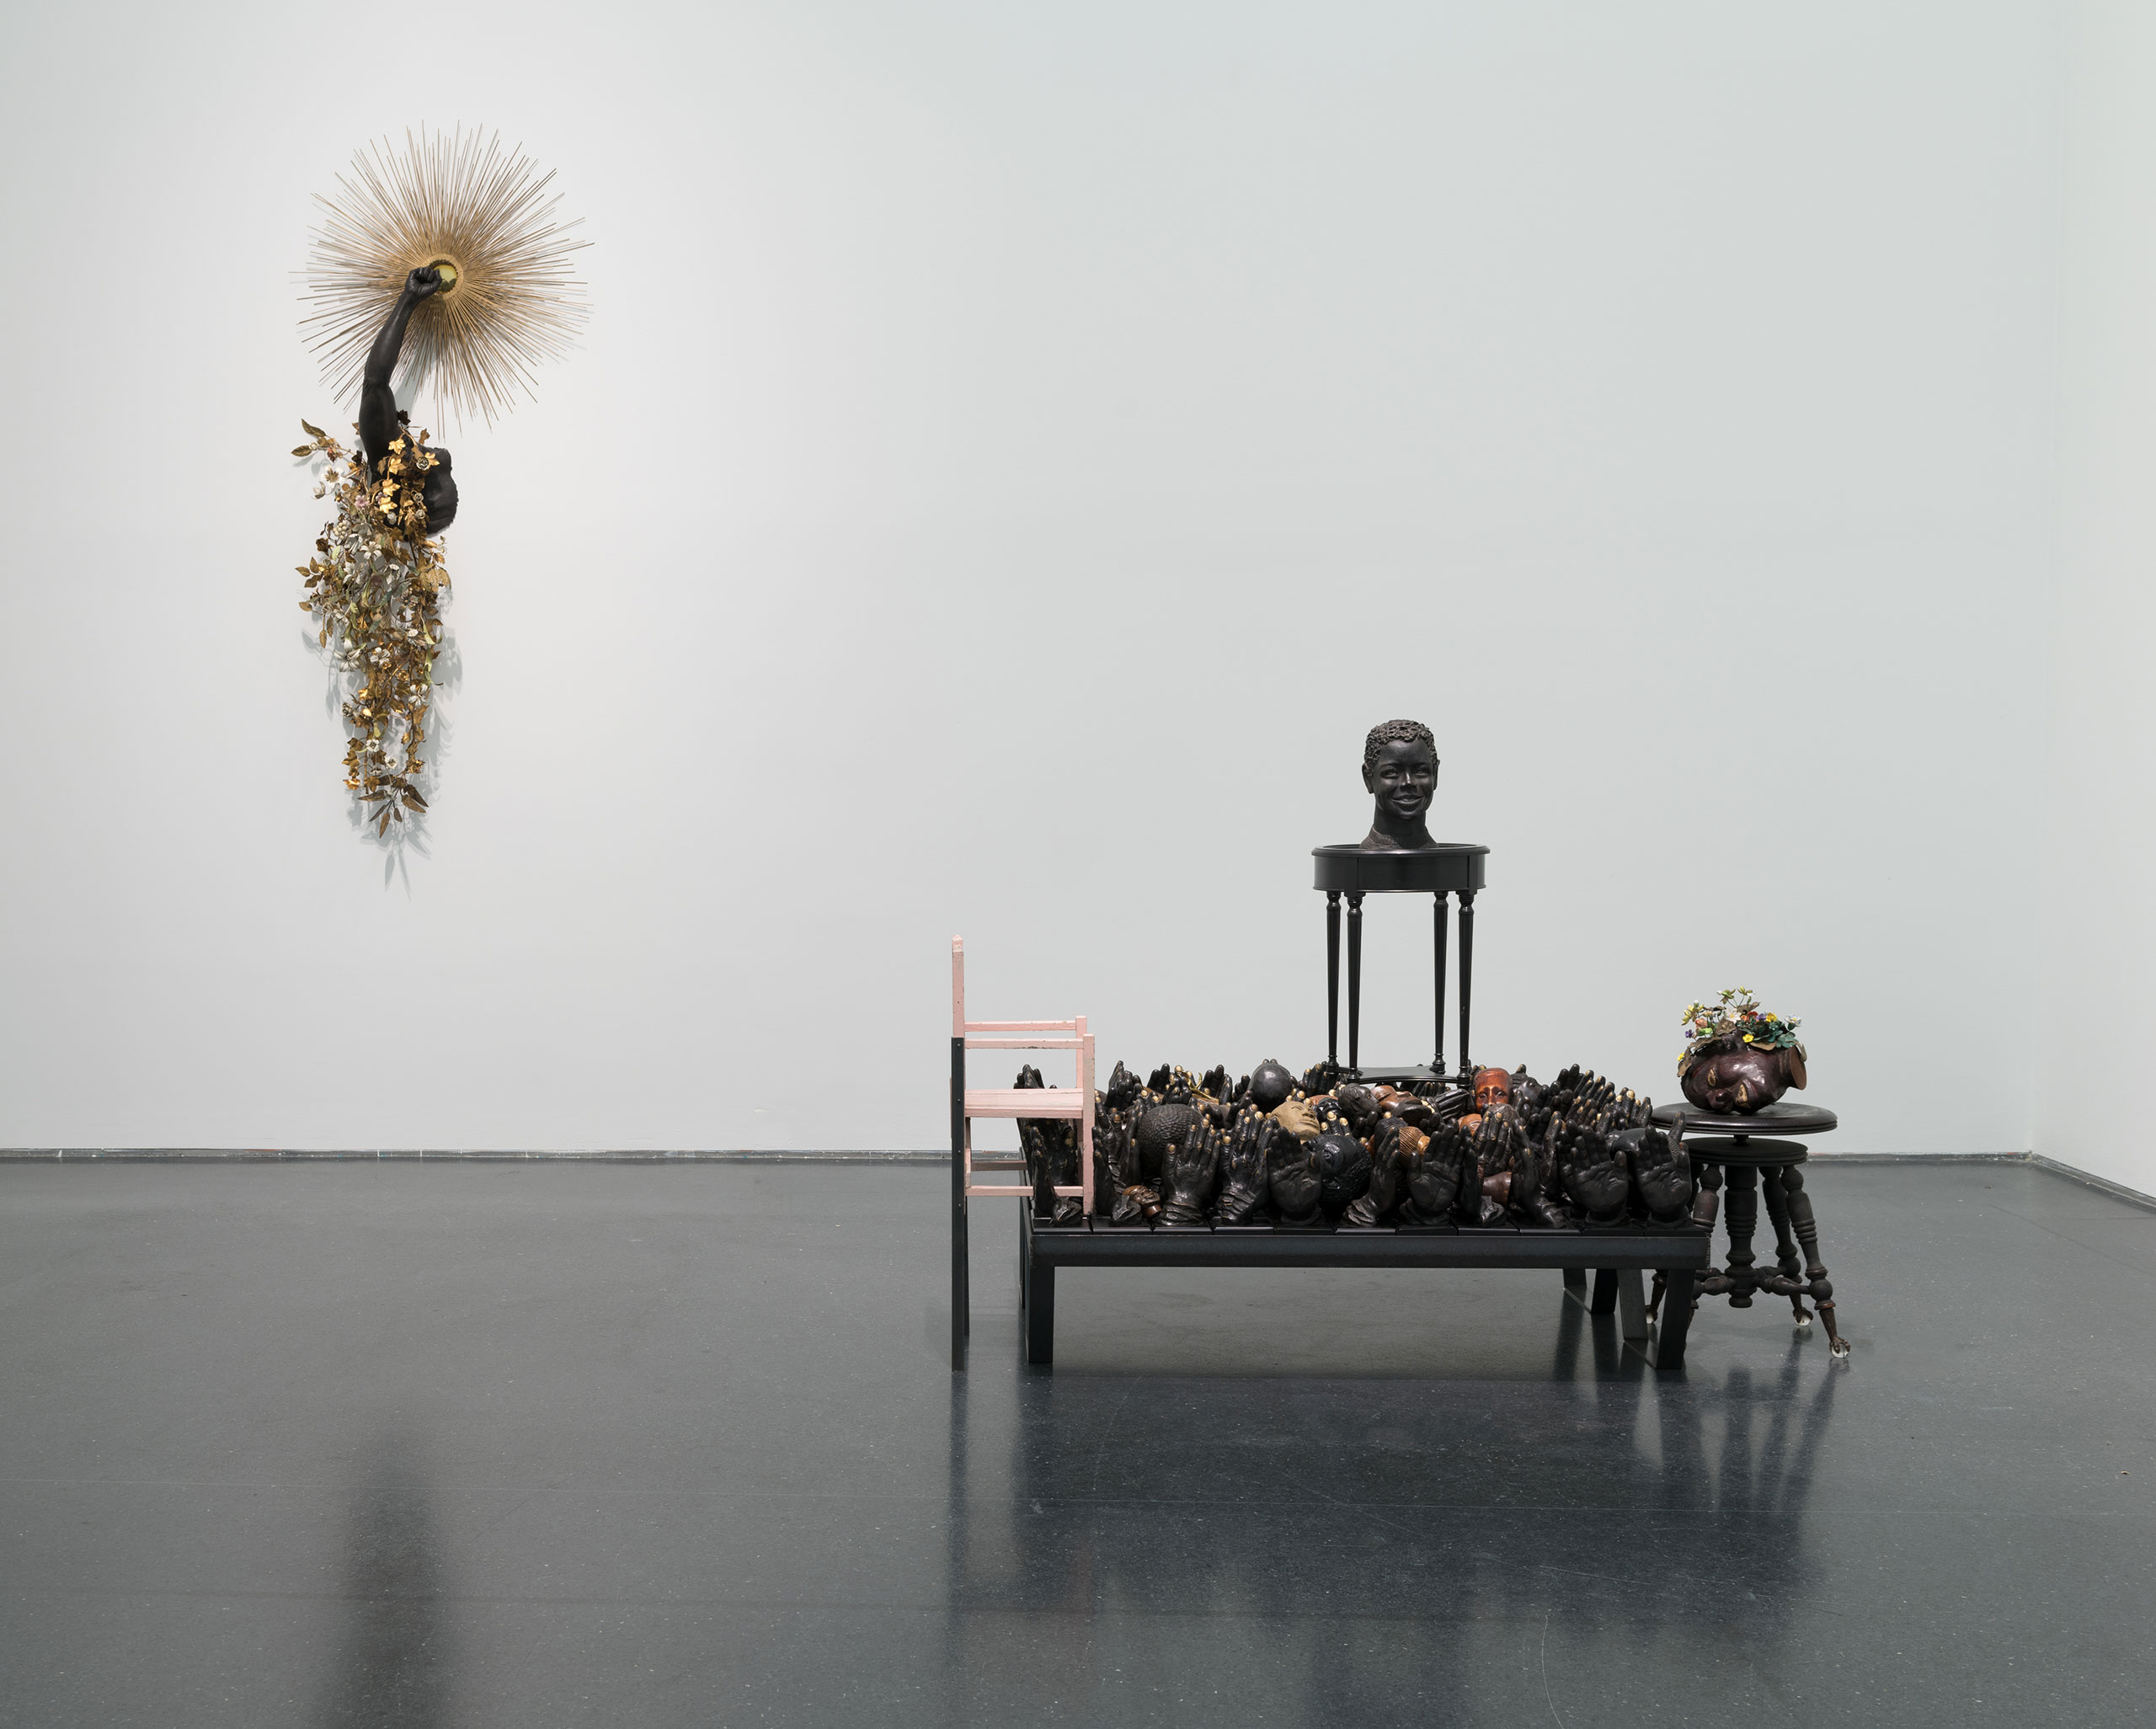 Installation view, Nick Cave: Forothermore, MCA Chicago. May 14 – October 2, 2022. Photo: Nathan Keay, © MCA Chicago.